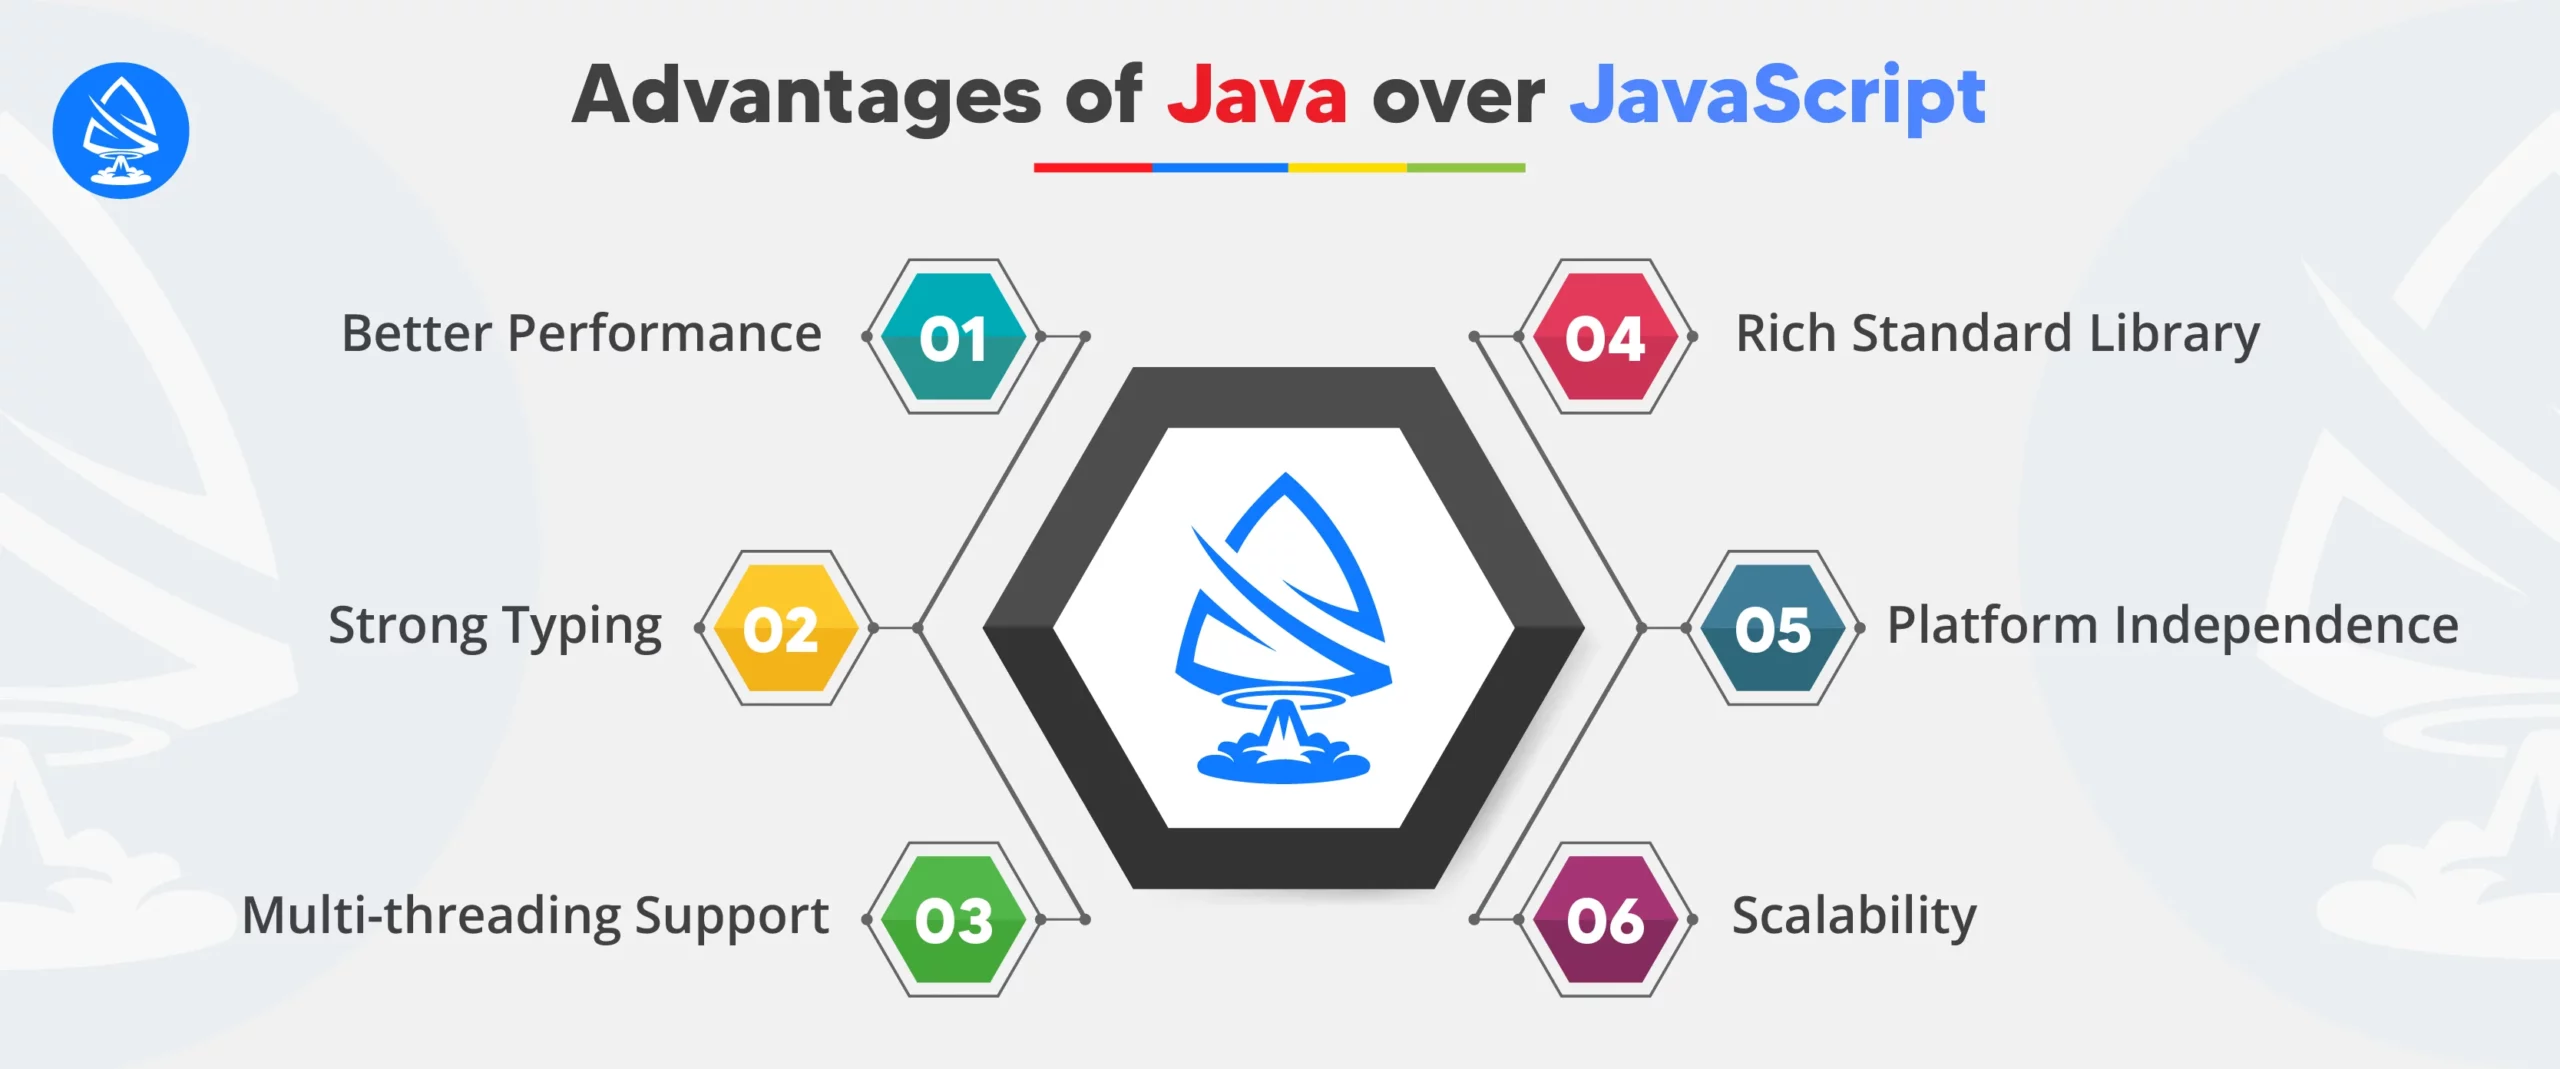 Advantages of Java Compared to JavaScript: